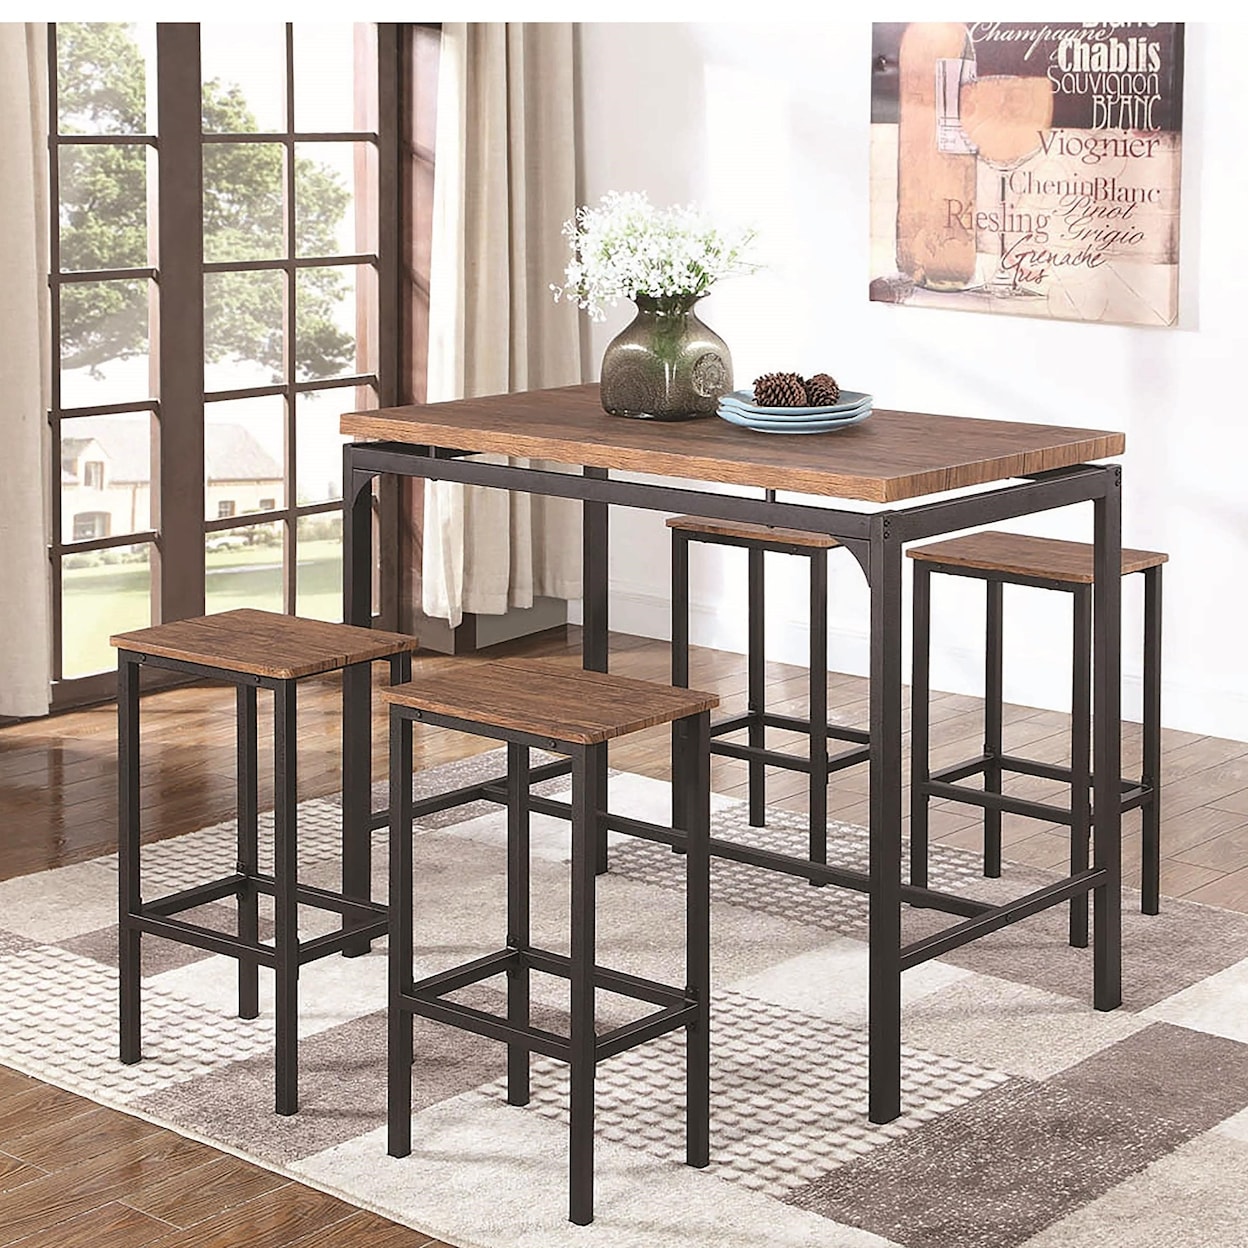 Michael Alan CSR Select 182002 Table and Chair Set for Four